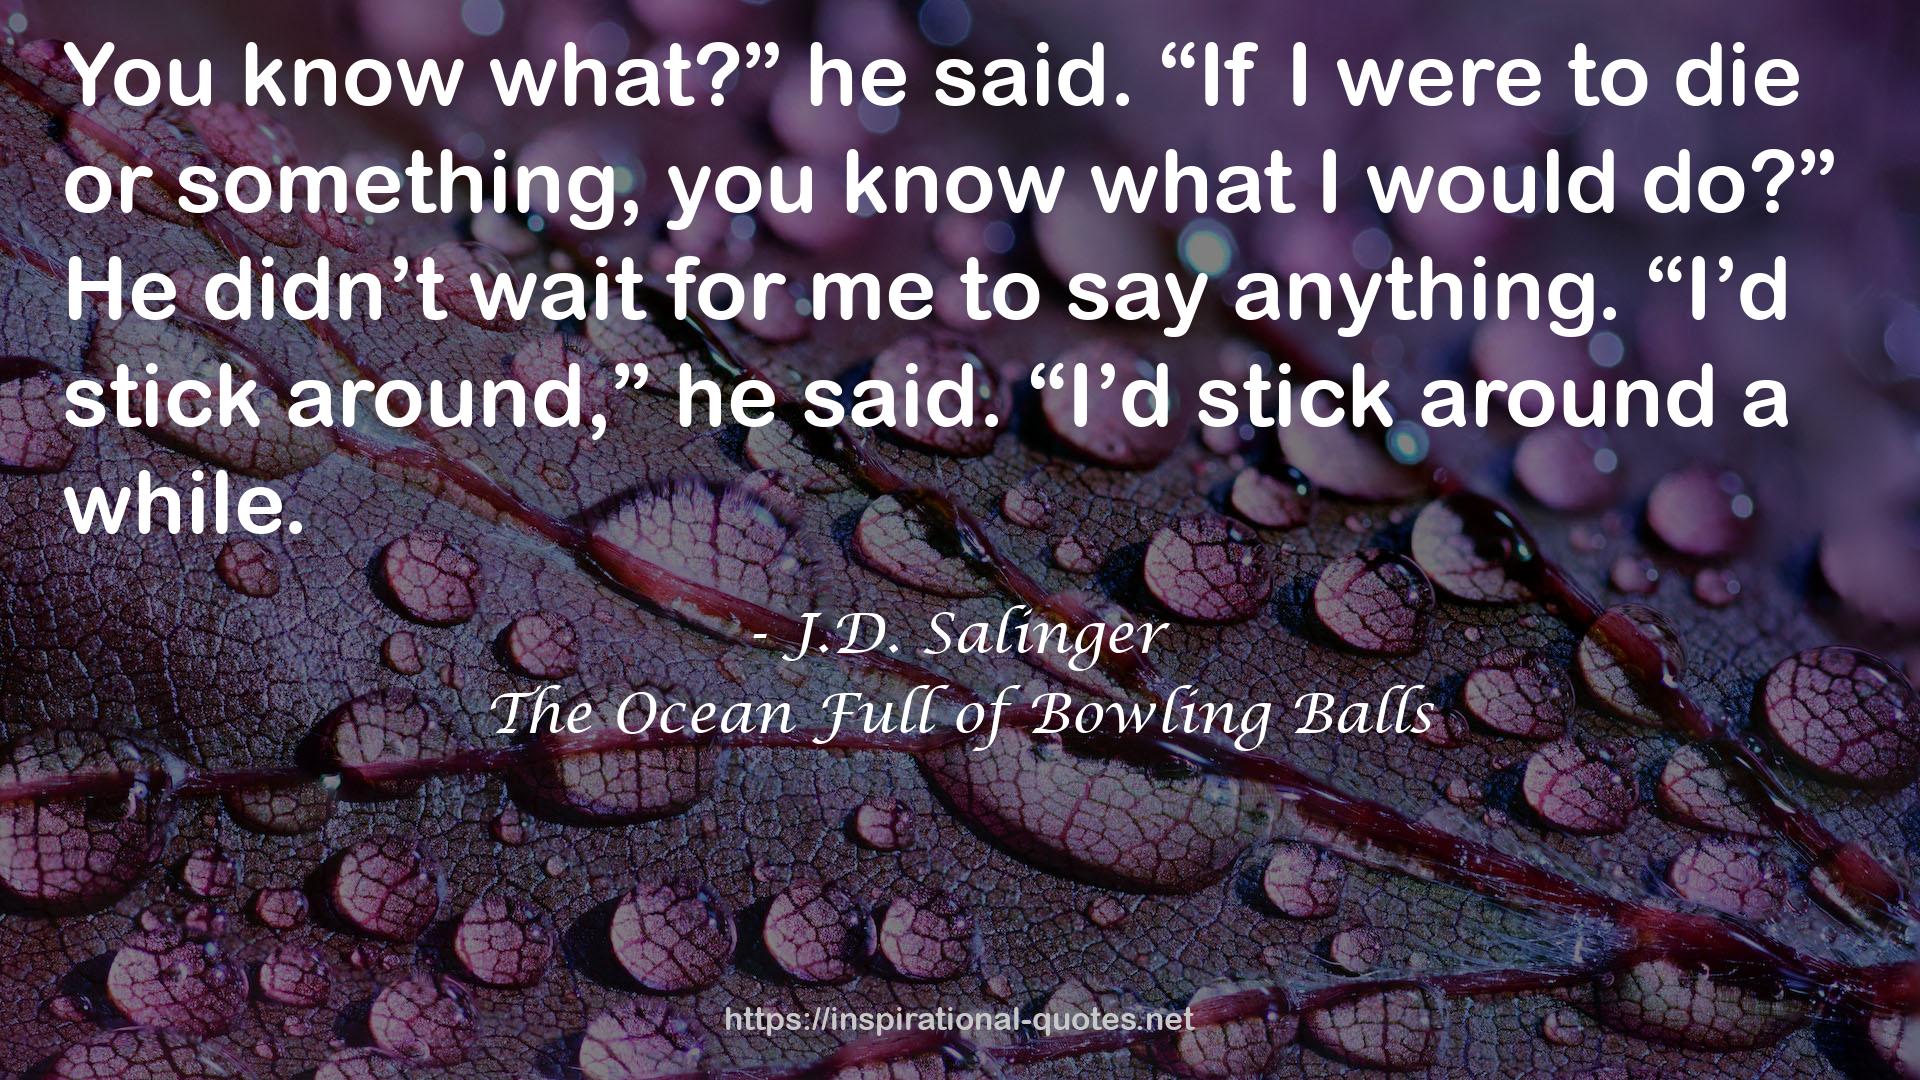 The Ocean Full of Bowling Balls QUOTES